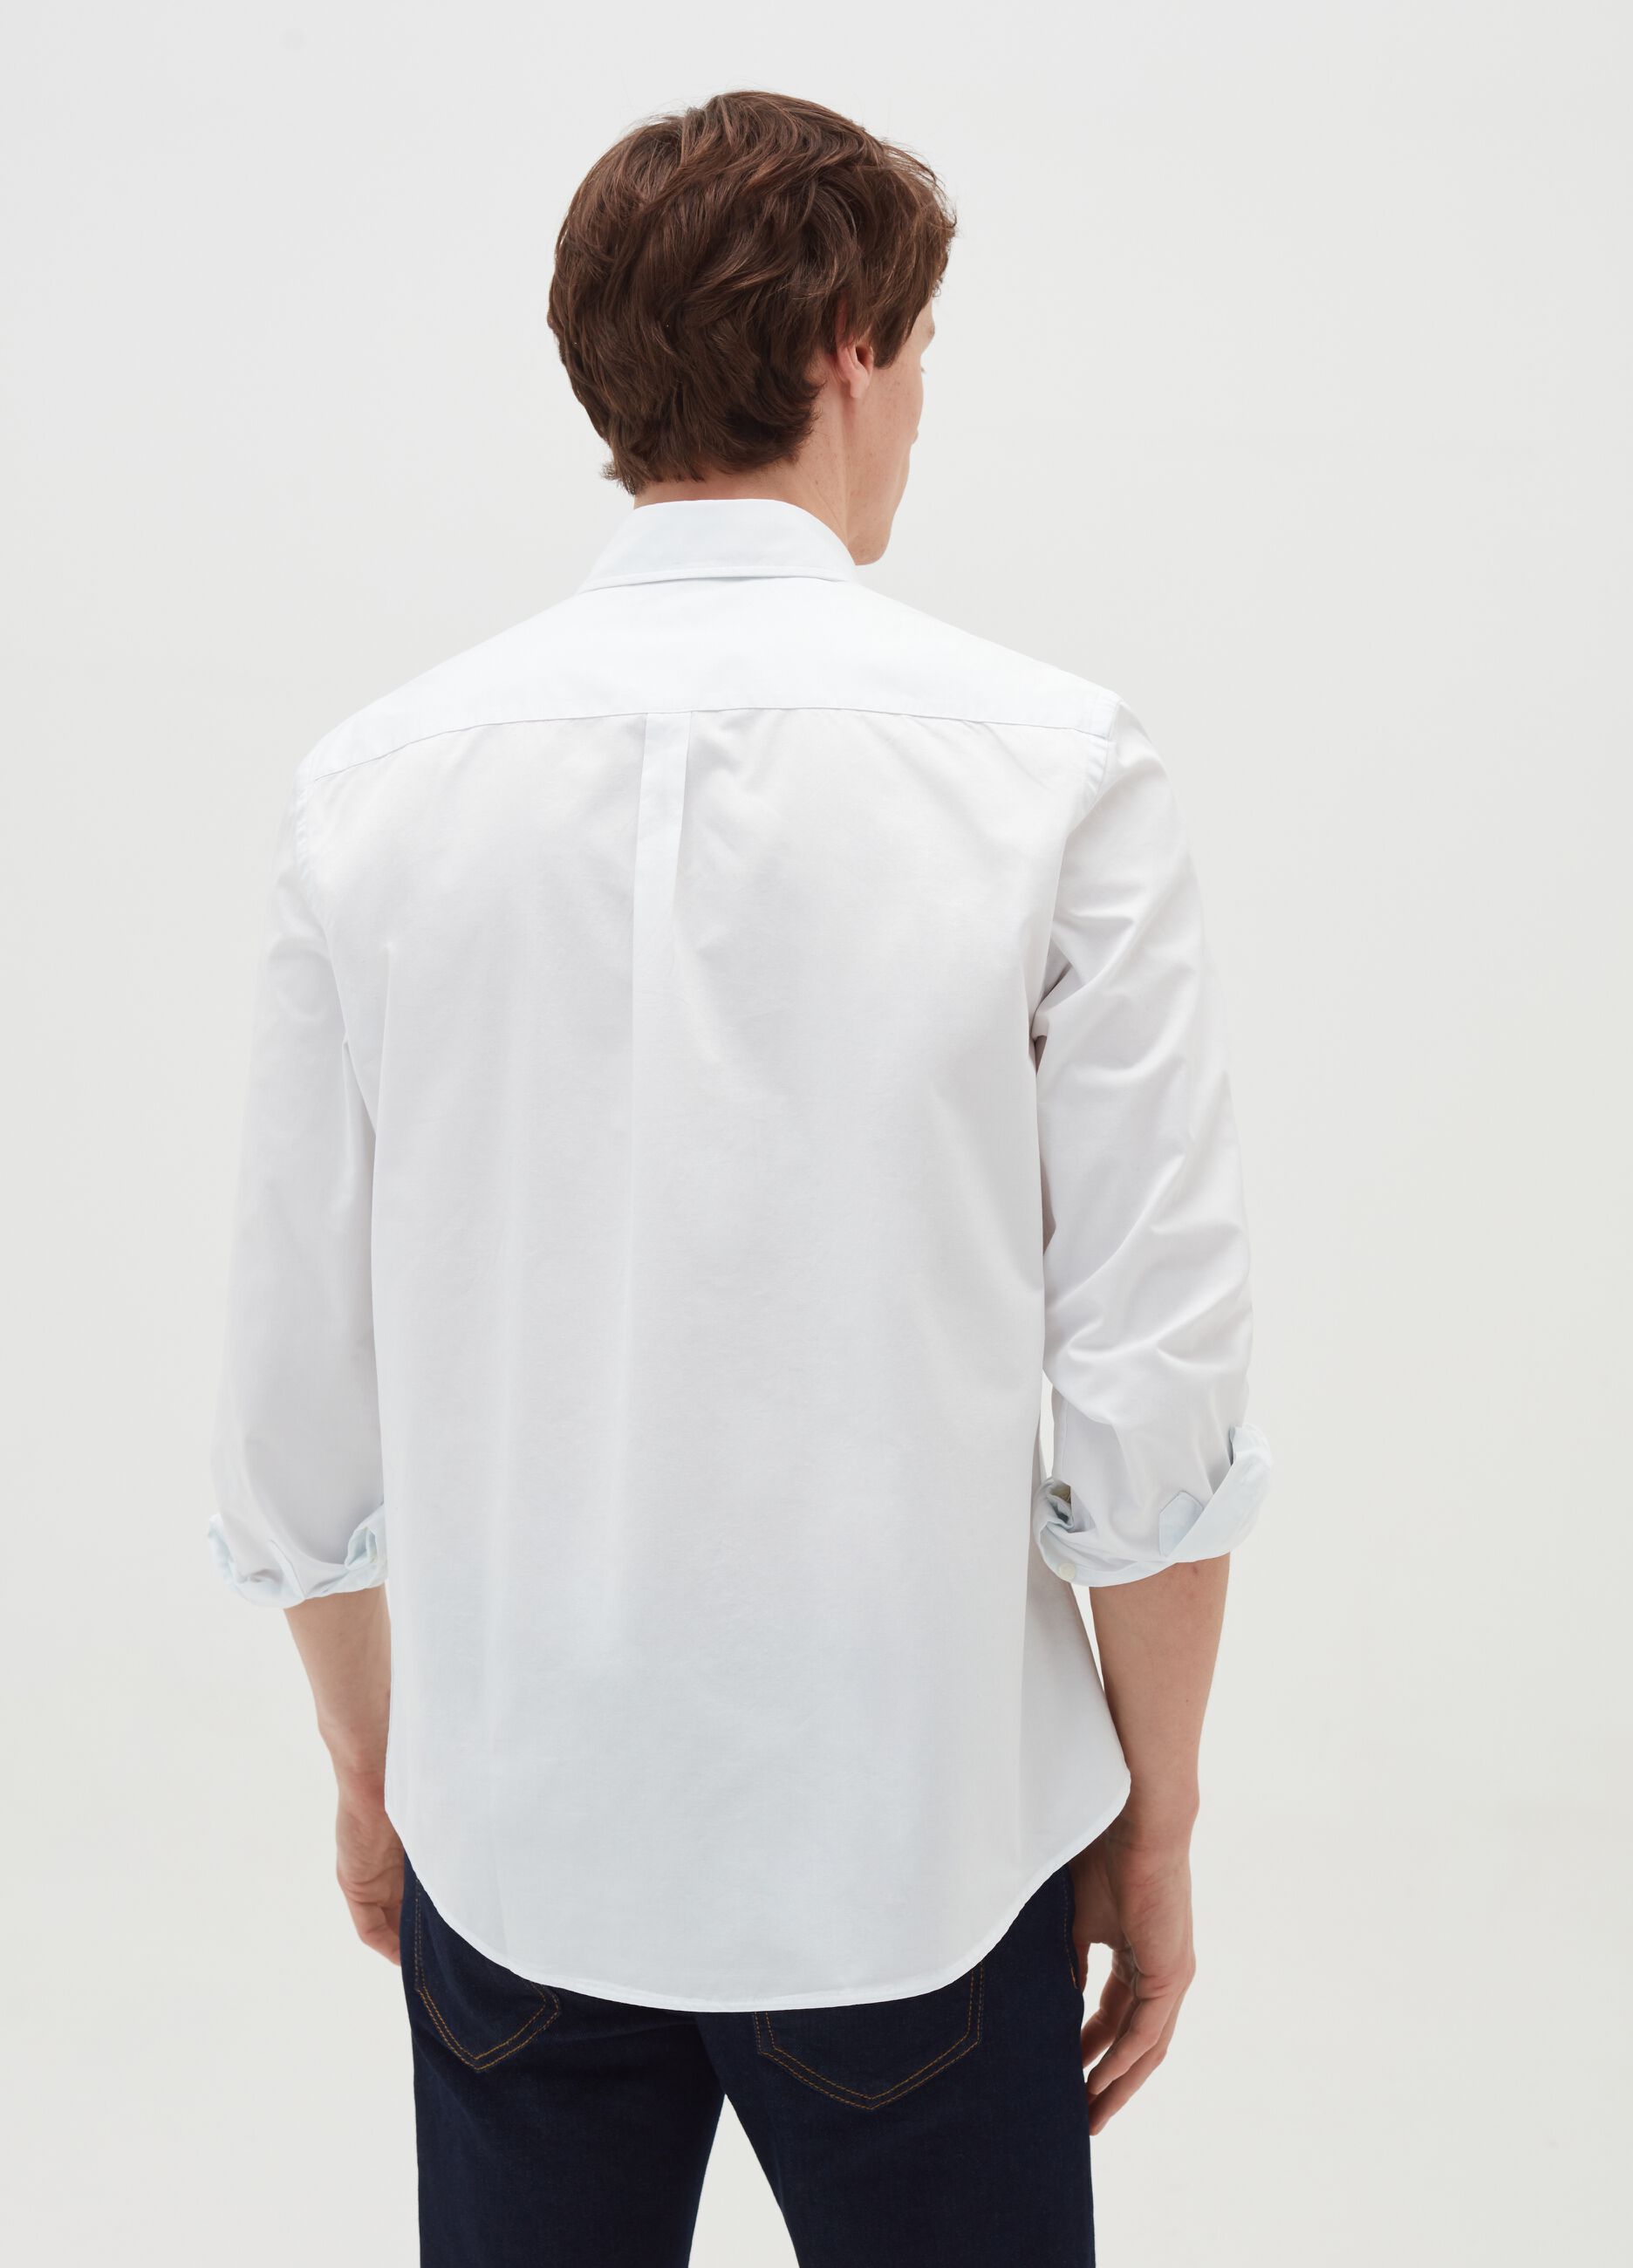 100% cotton shirt with button-down collar